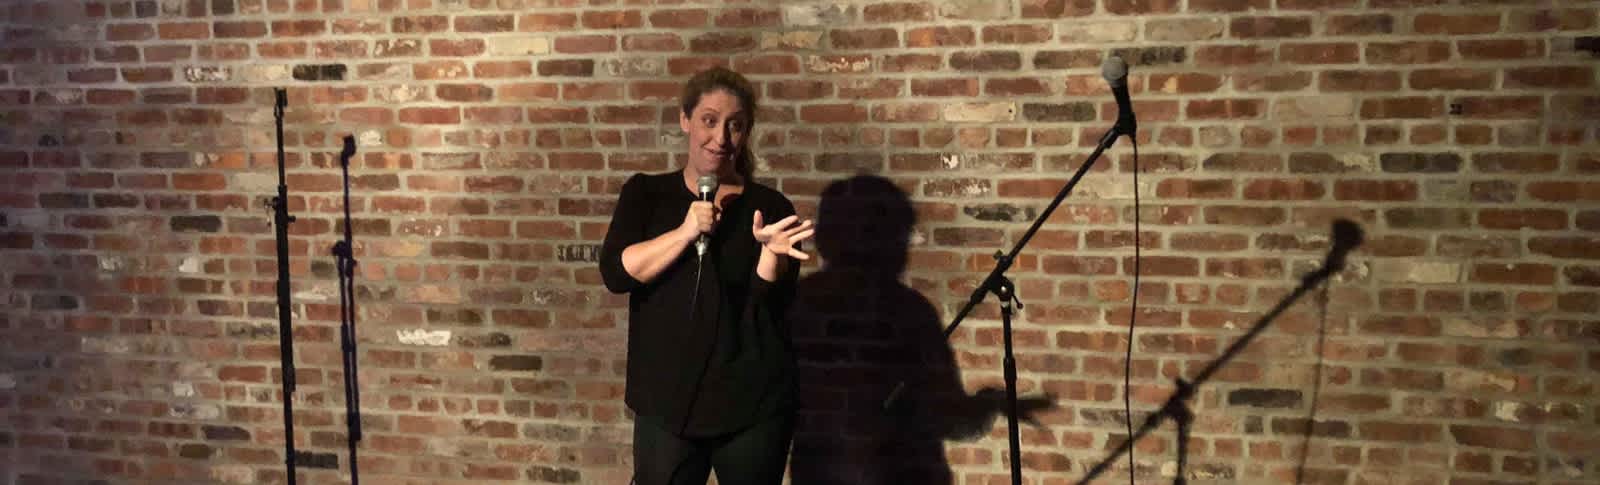 Pam standing in front of a brick wall with a mic doing stand up